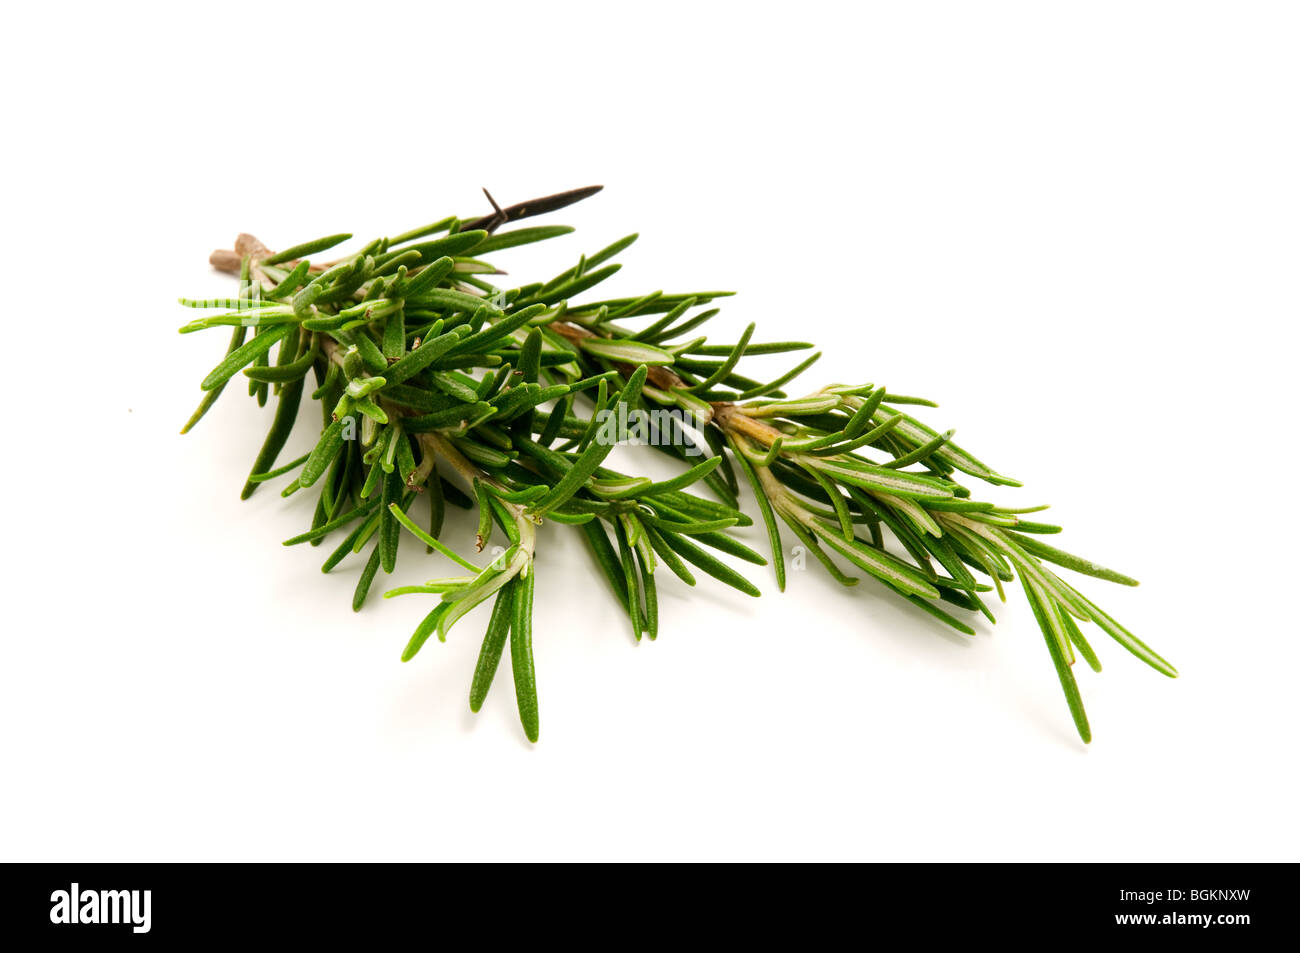 Rosemary sprig on a white background Stock Photo